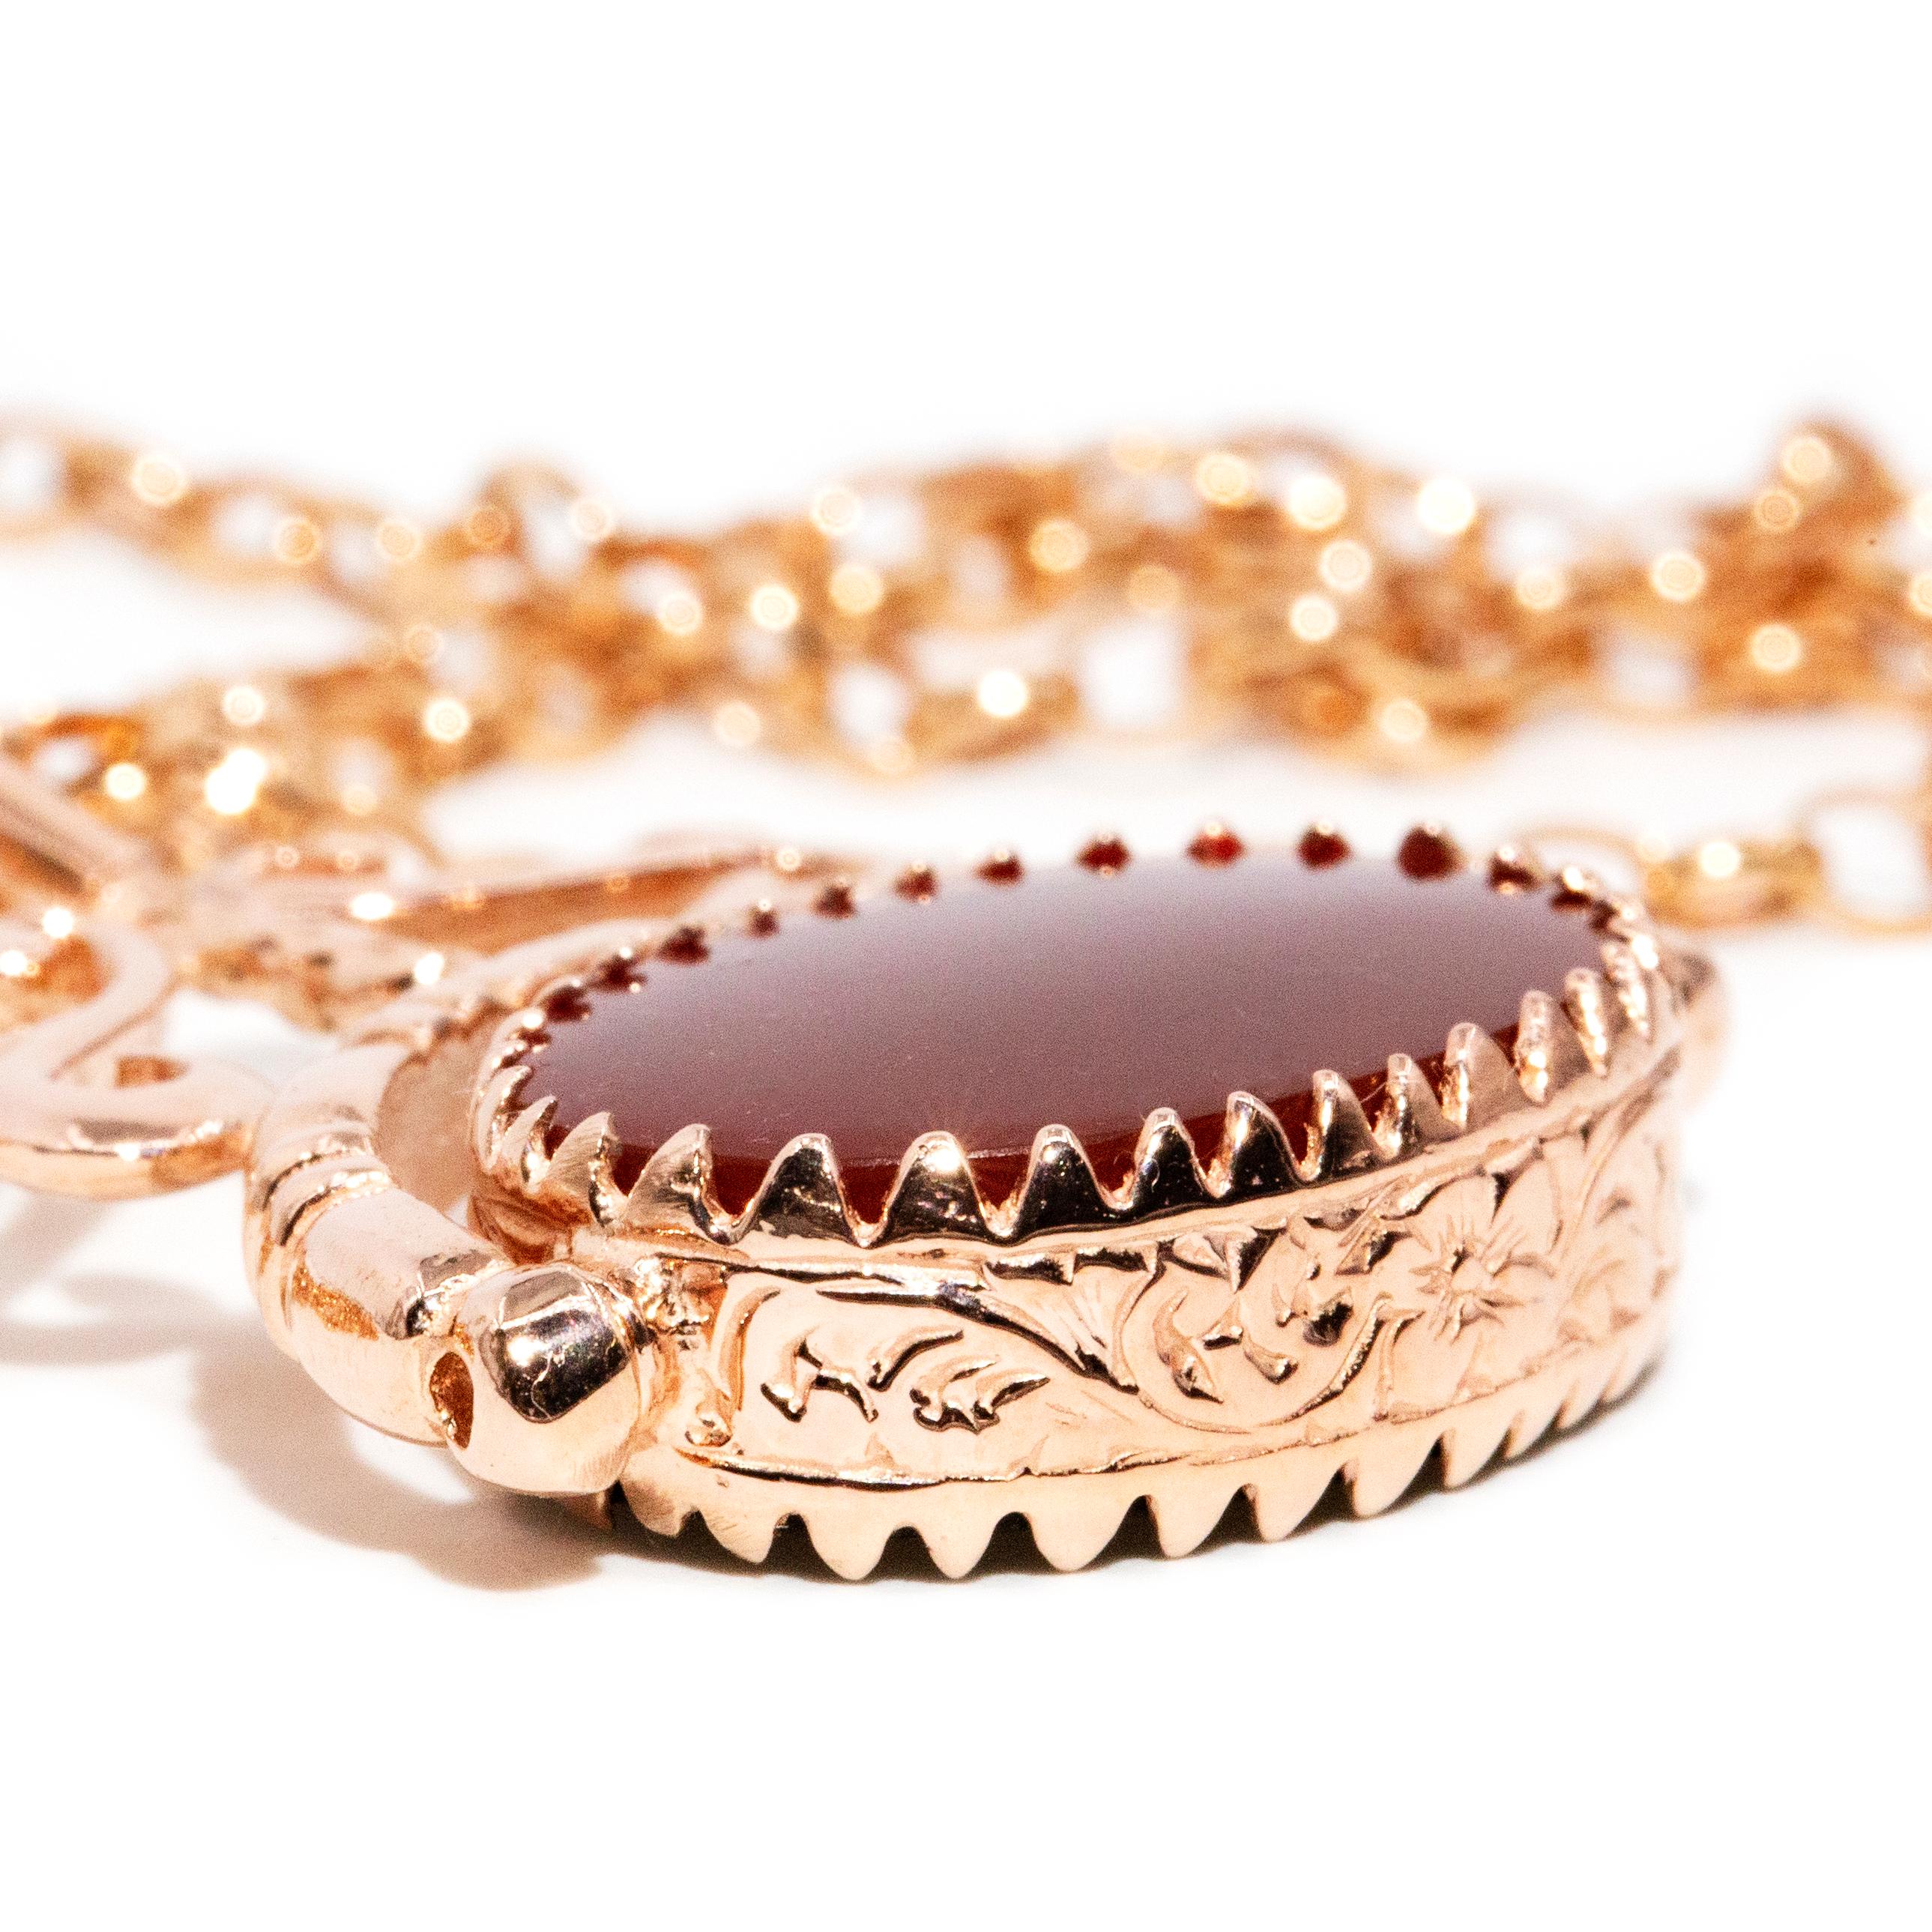 The Callie Pendant & Chain is a gorgeous vintage adornment that ribbons and scrolls its way to a spinner of crimson carnelian and onyx. Her precious gems are embraced by beautiful garlands of flowers carved into 9 carat rose gold.

The Callie